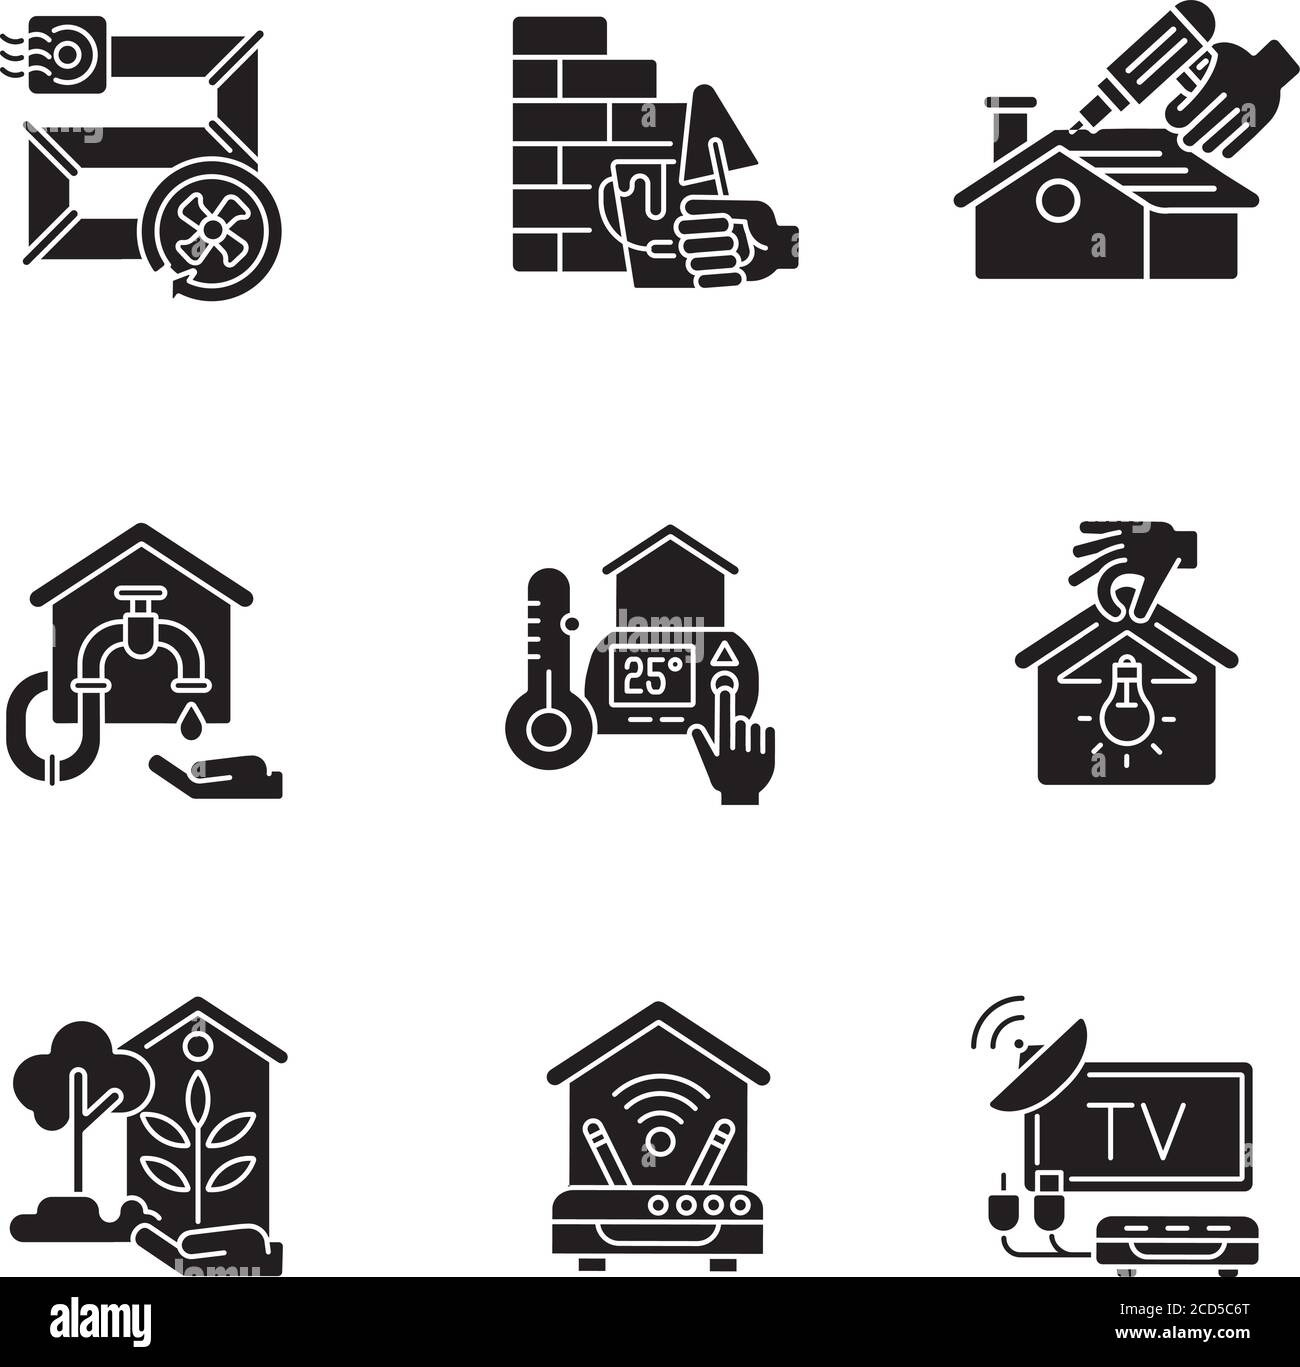 House improvements black glyph icons set on white space Stock Vector